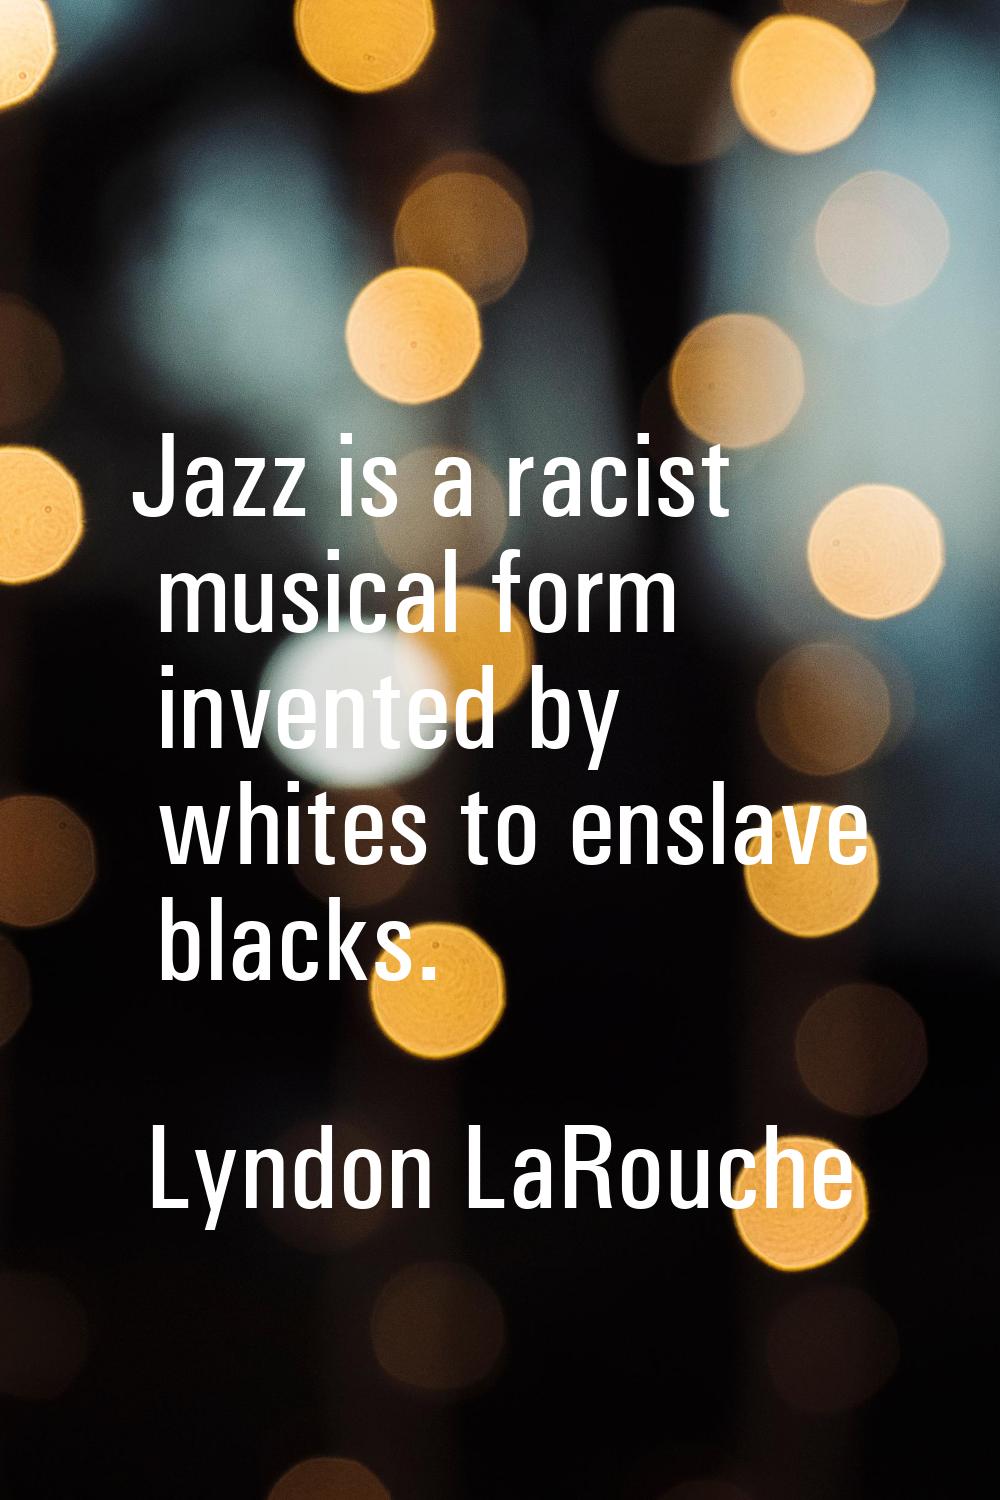 Jazz is a racist musical form invented by whites to enslave blacks.